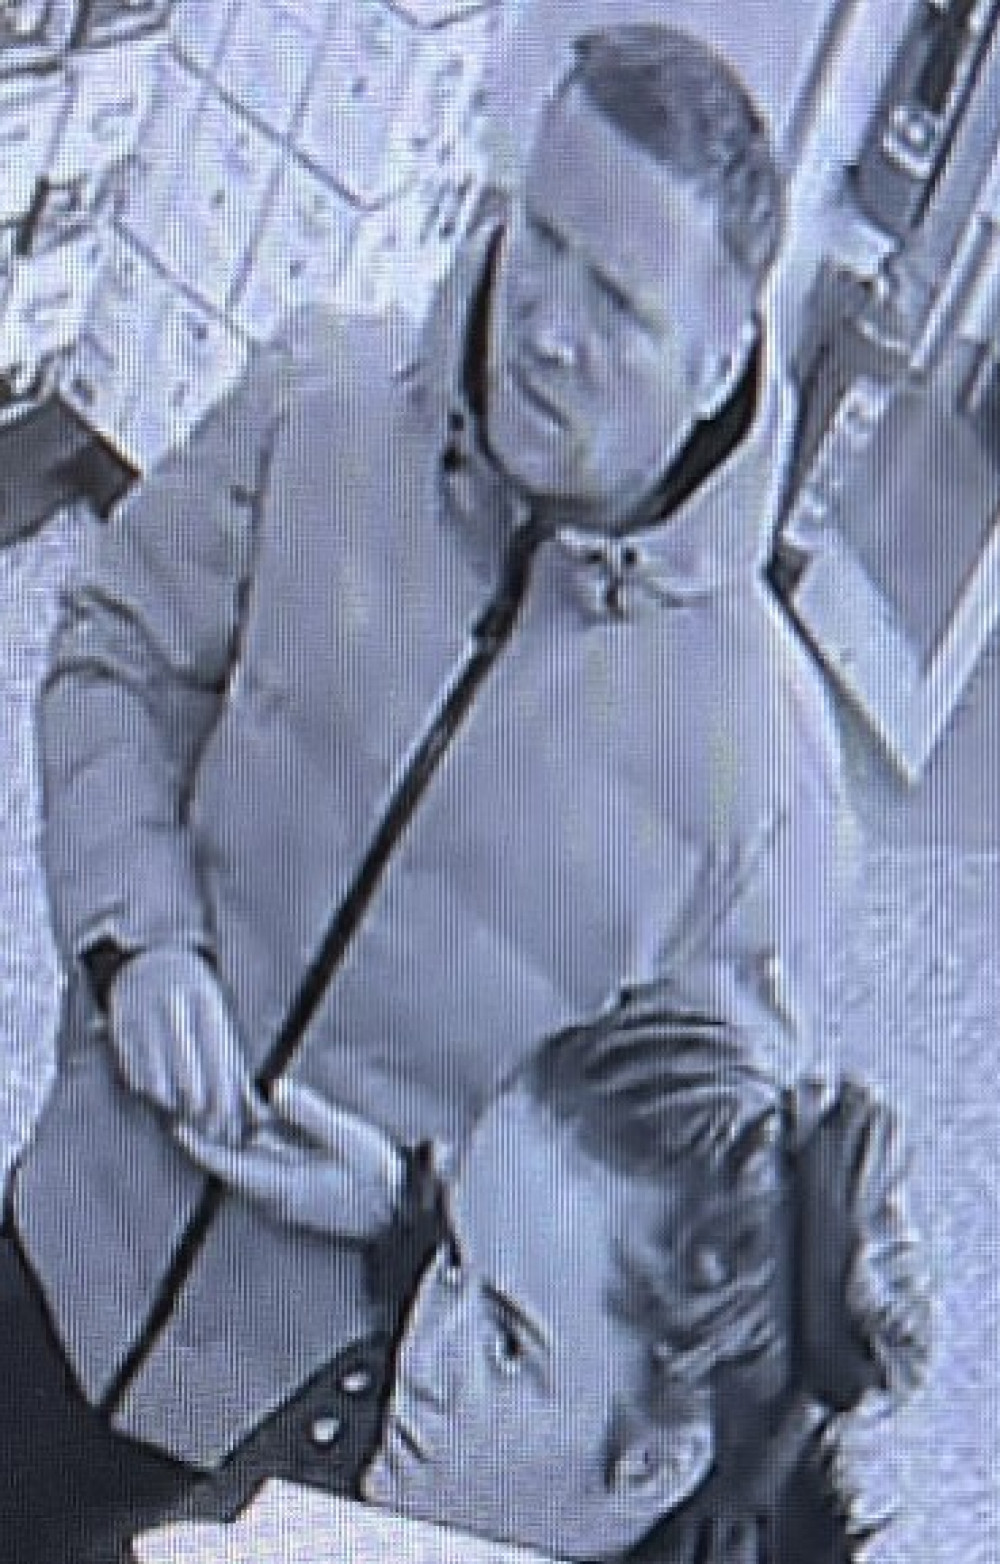 CCTV appeal after theft in Letchworth Garden City